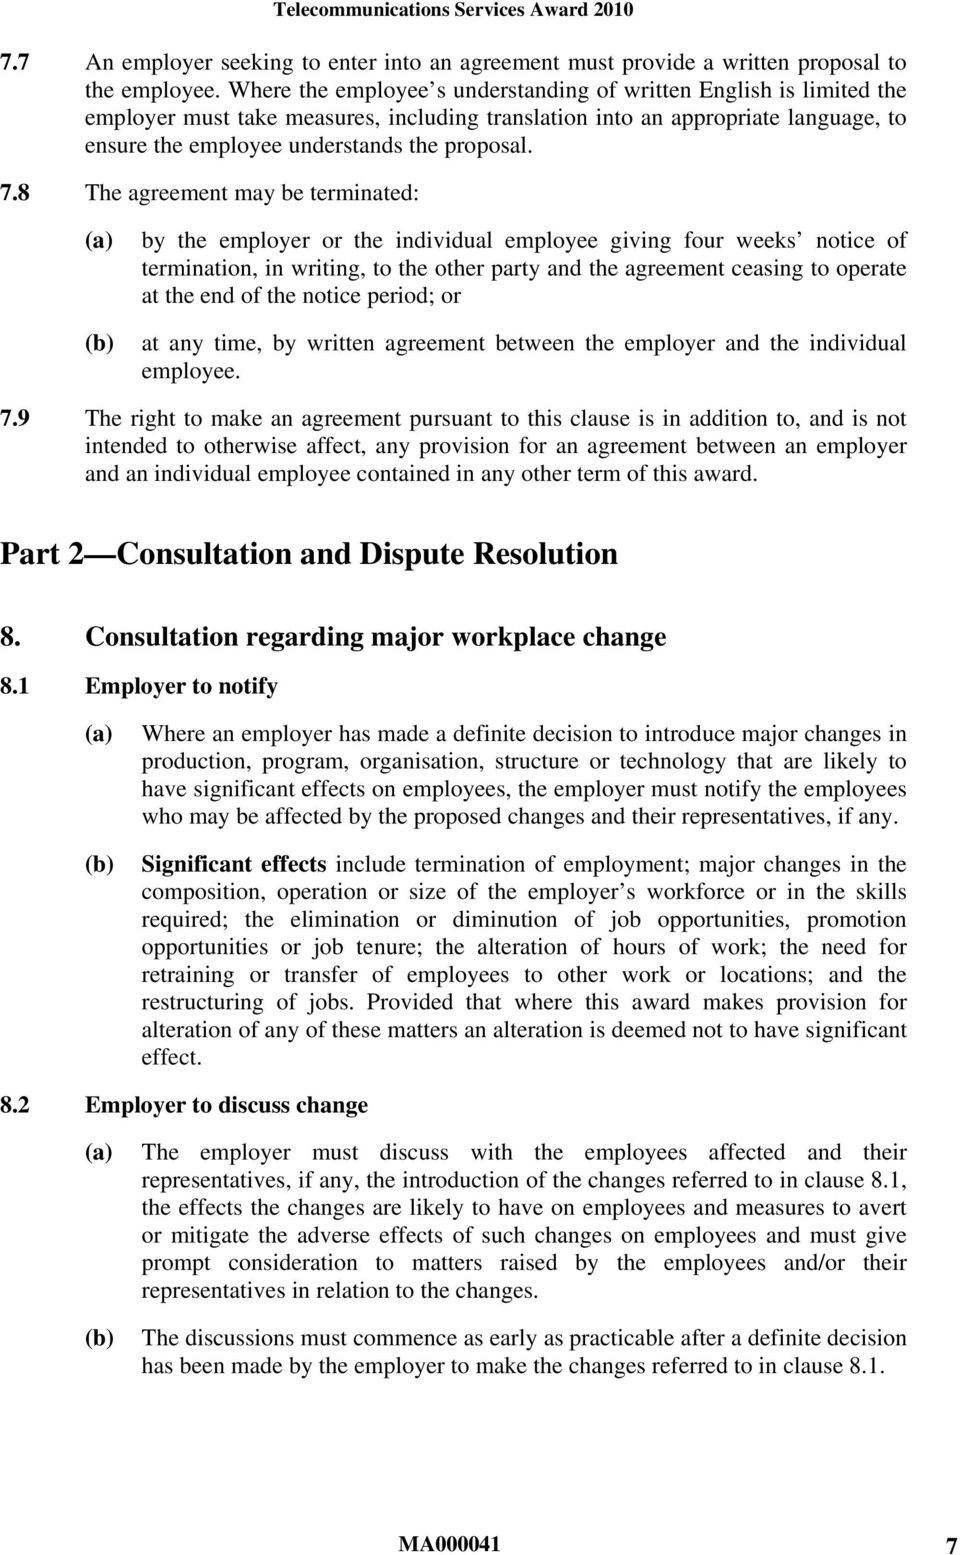 7.8 The agreement may be terminated: by the employer or the individual employee giving four weeks notice of termination, in writing, to the other party and the agreement ceasing to operate at the end